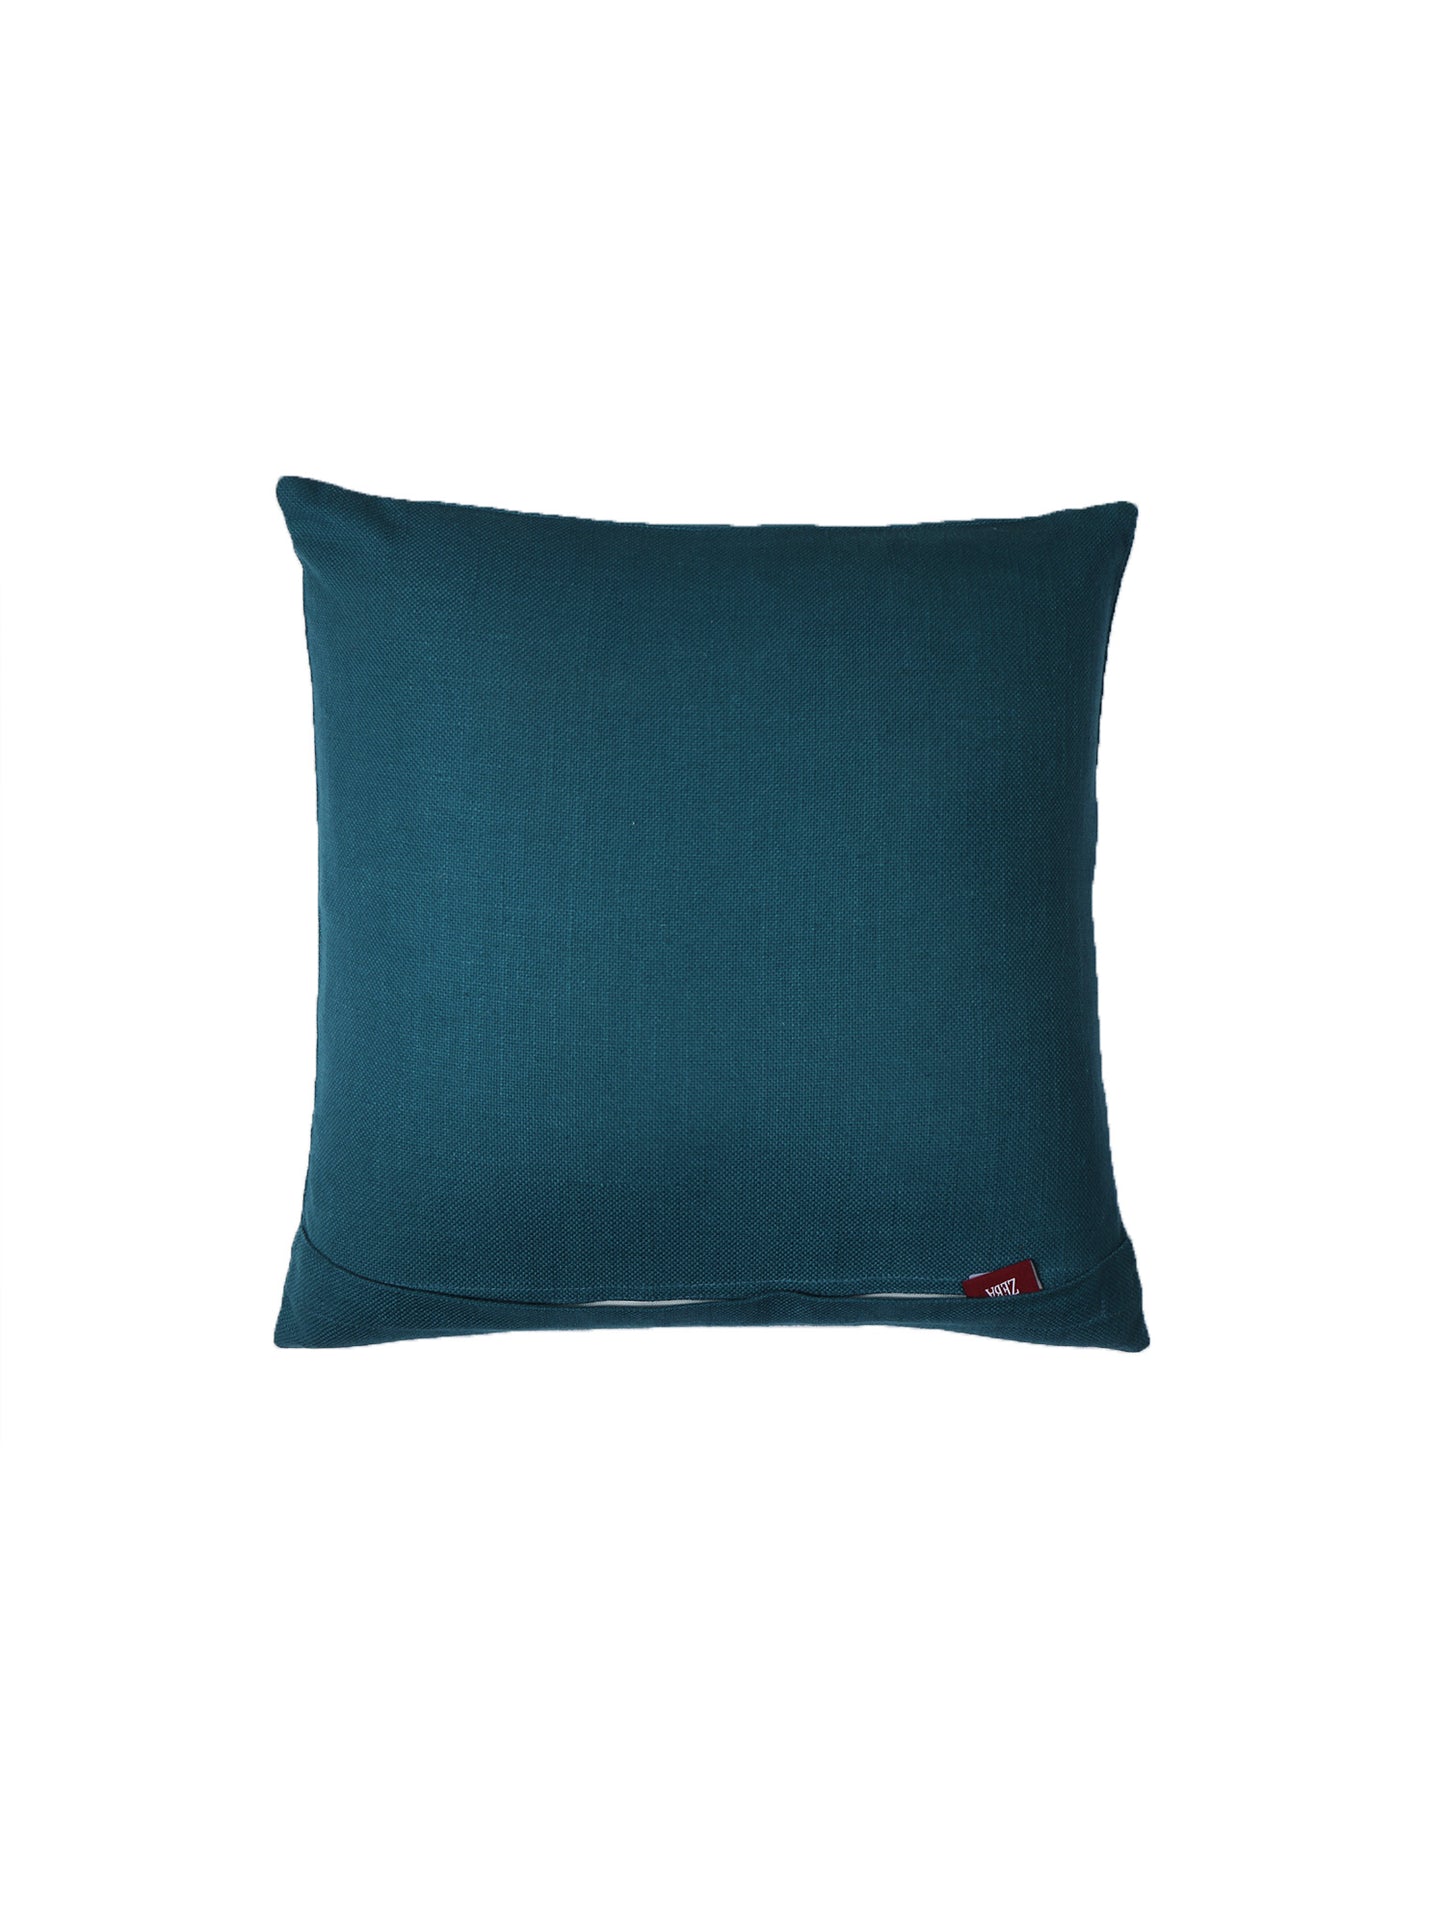 Cushion Cover for Sofa, Bed Cotton Blend |Self Textured | Teal Blue - 16x16in(40x40cm) (Pack of 1)